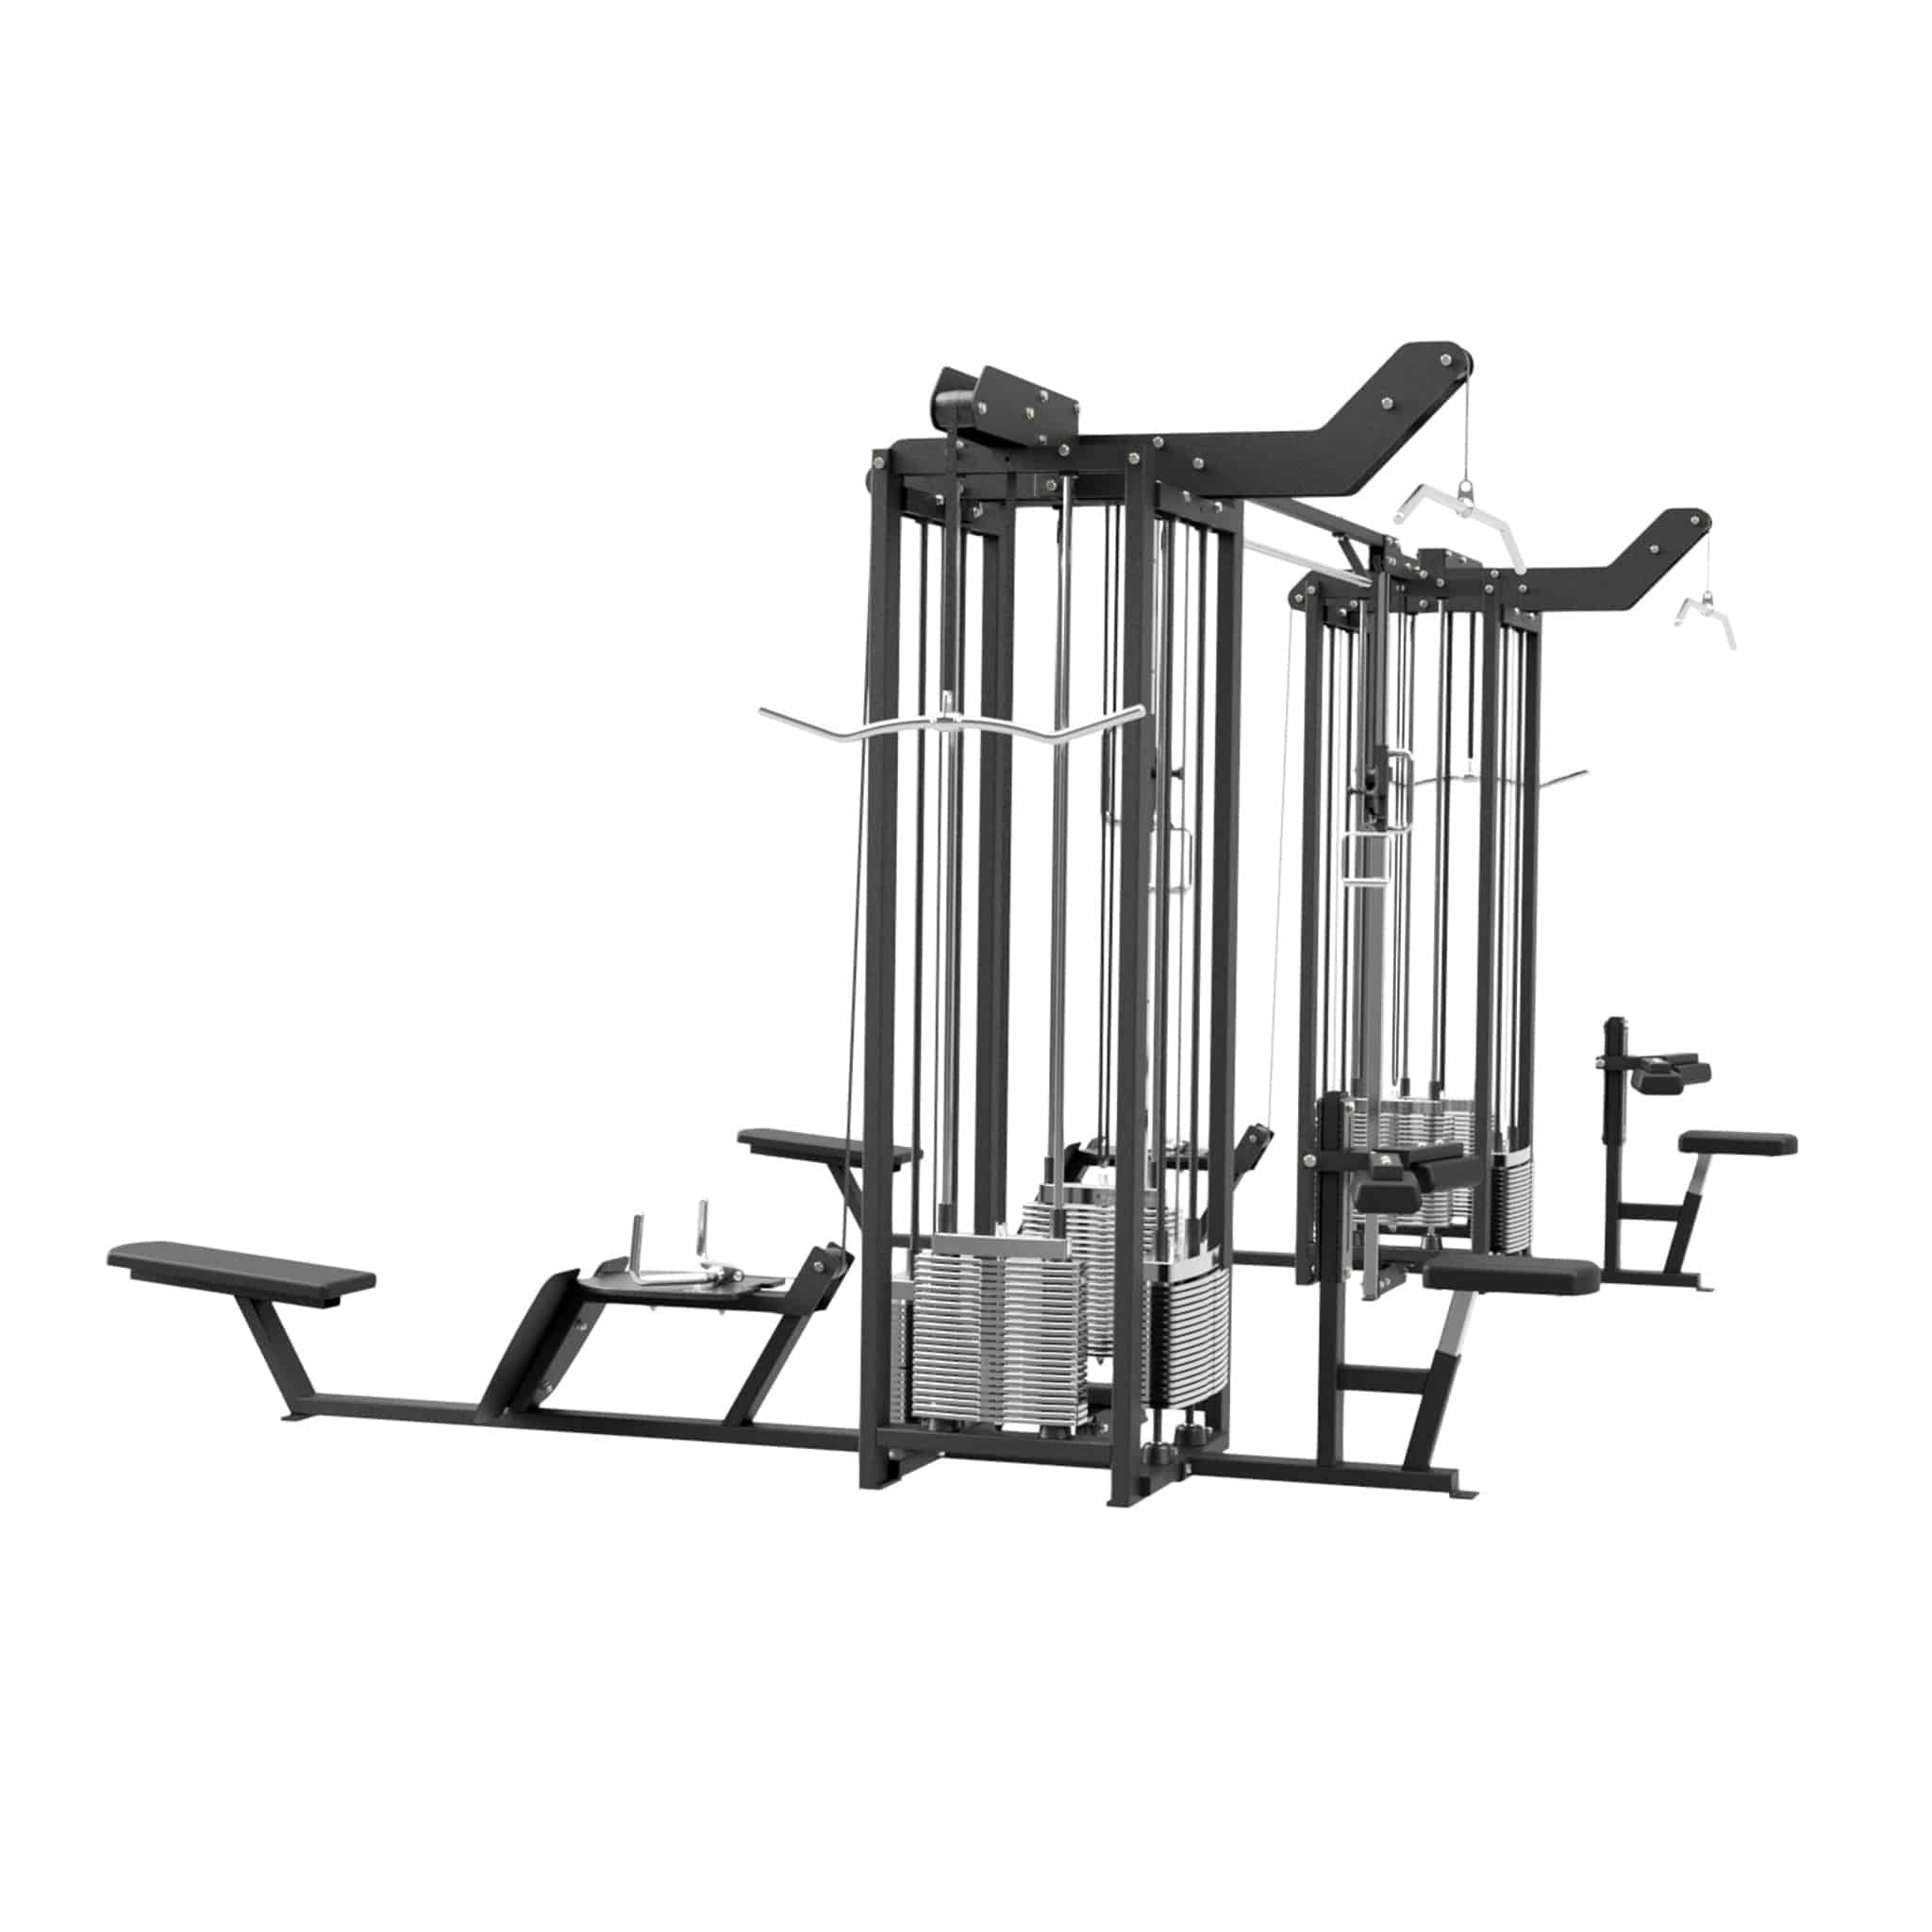 Multi gym 8-station cable cross 215DK from Gymleco